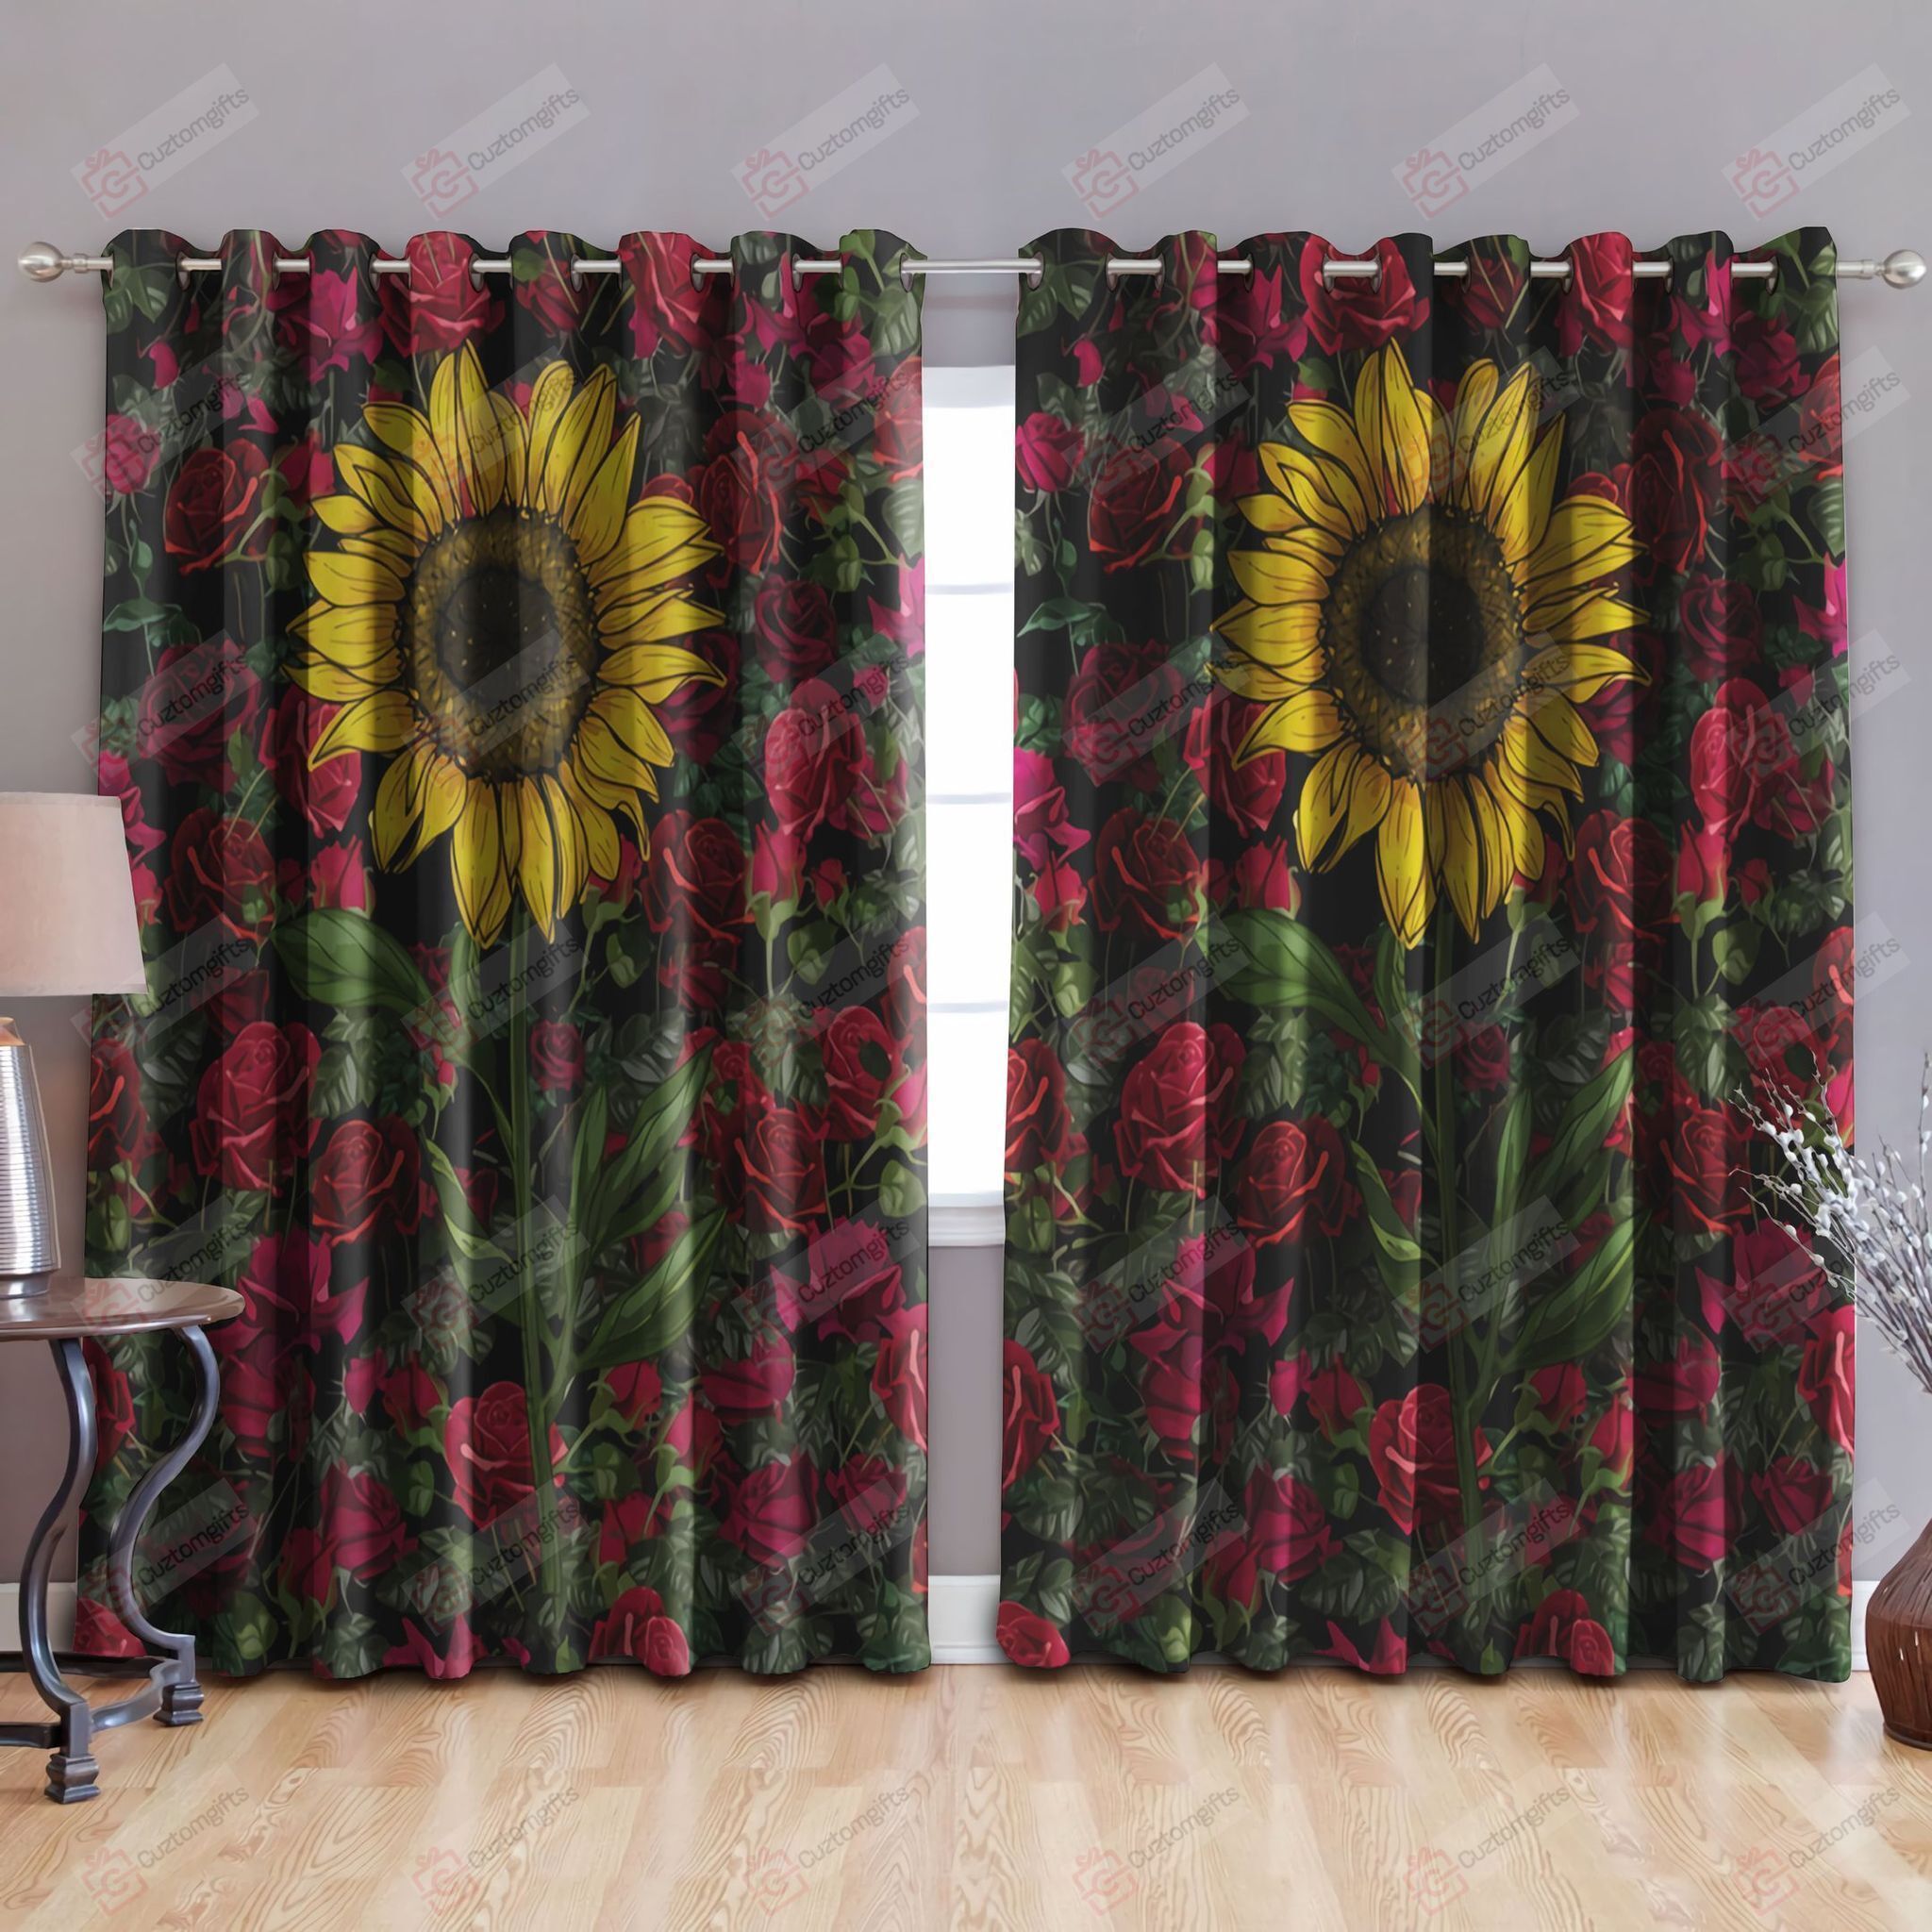 Sunflower And Roses Printed Window Curtain Home Decor